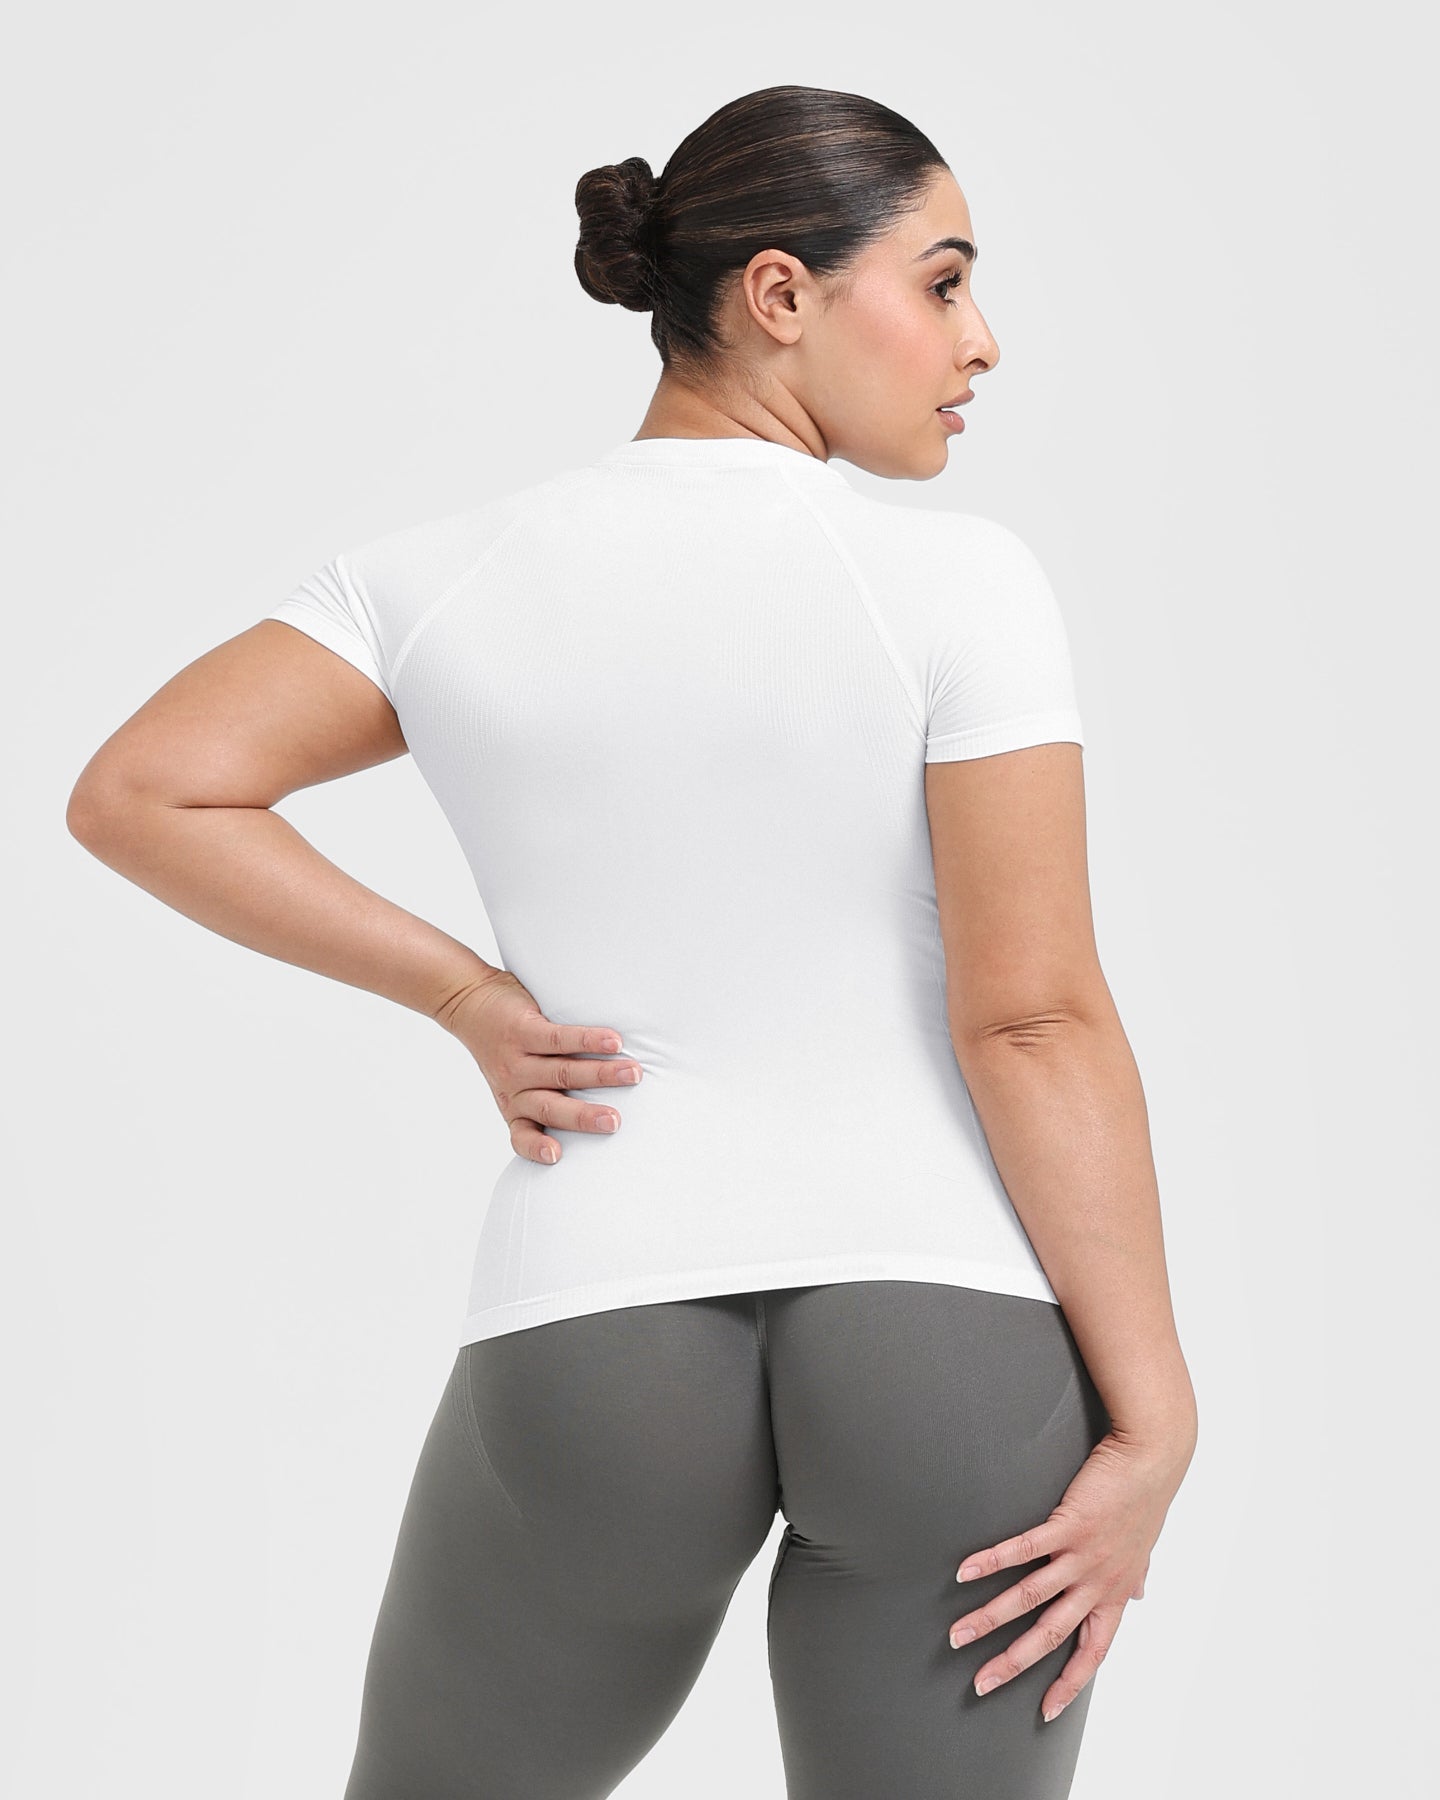 Womens High Waist Yoga Oner Active Leggings And Top Set Athletic Sportswear  For Gym And Workout L231129 From Pursui, $9.37